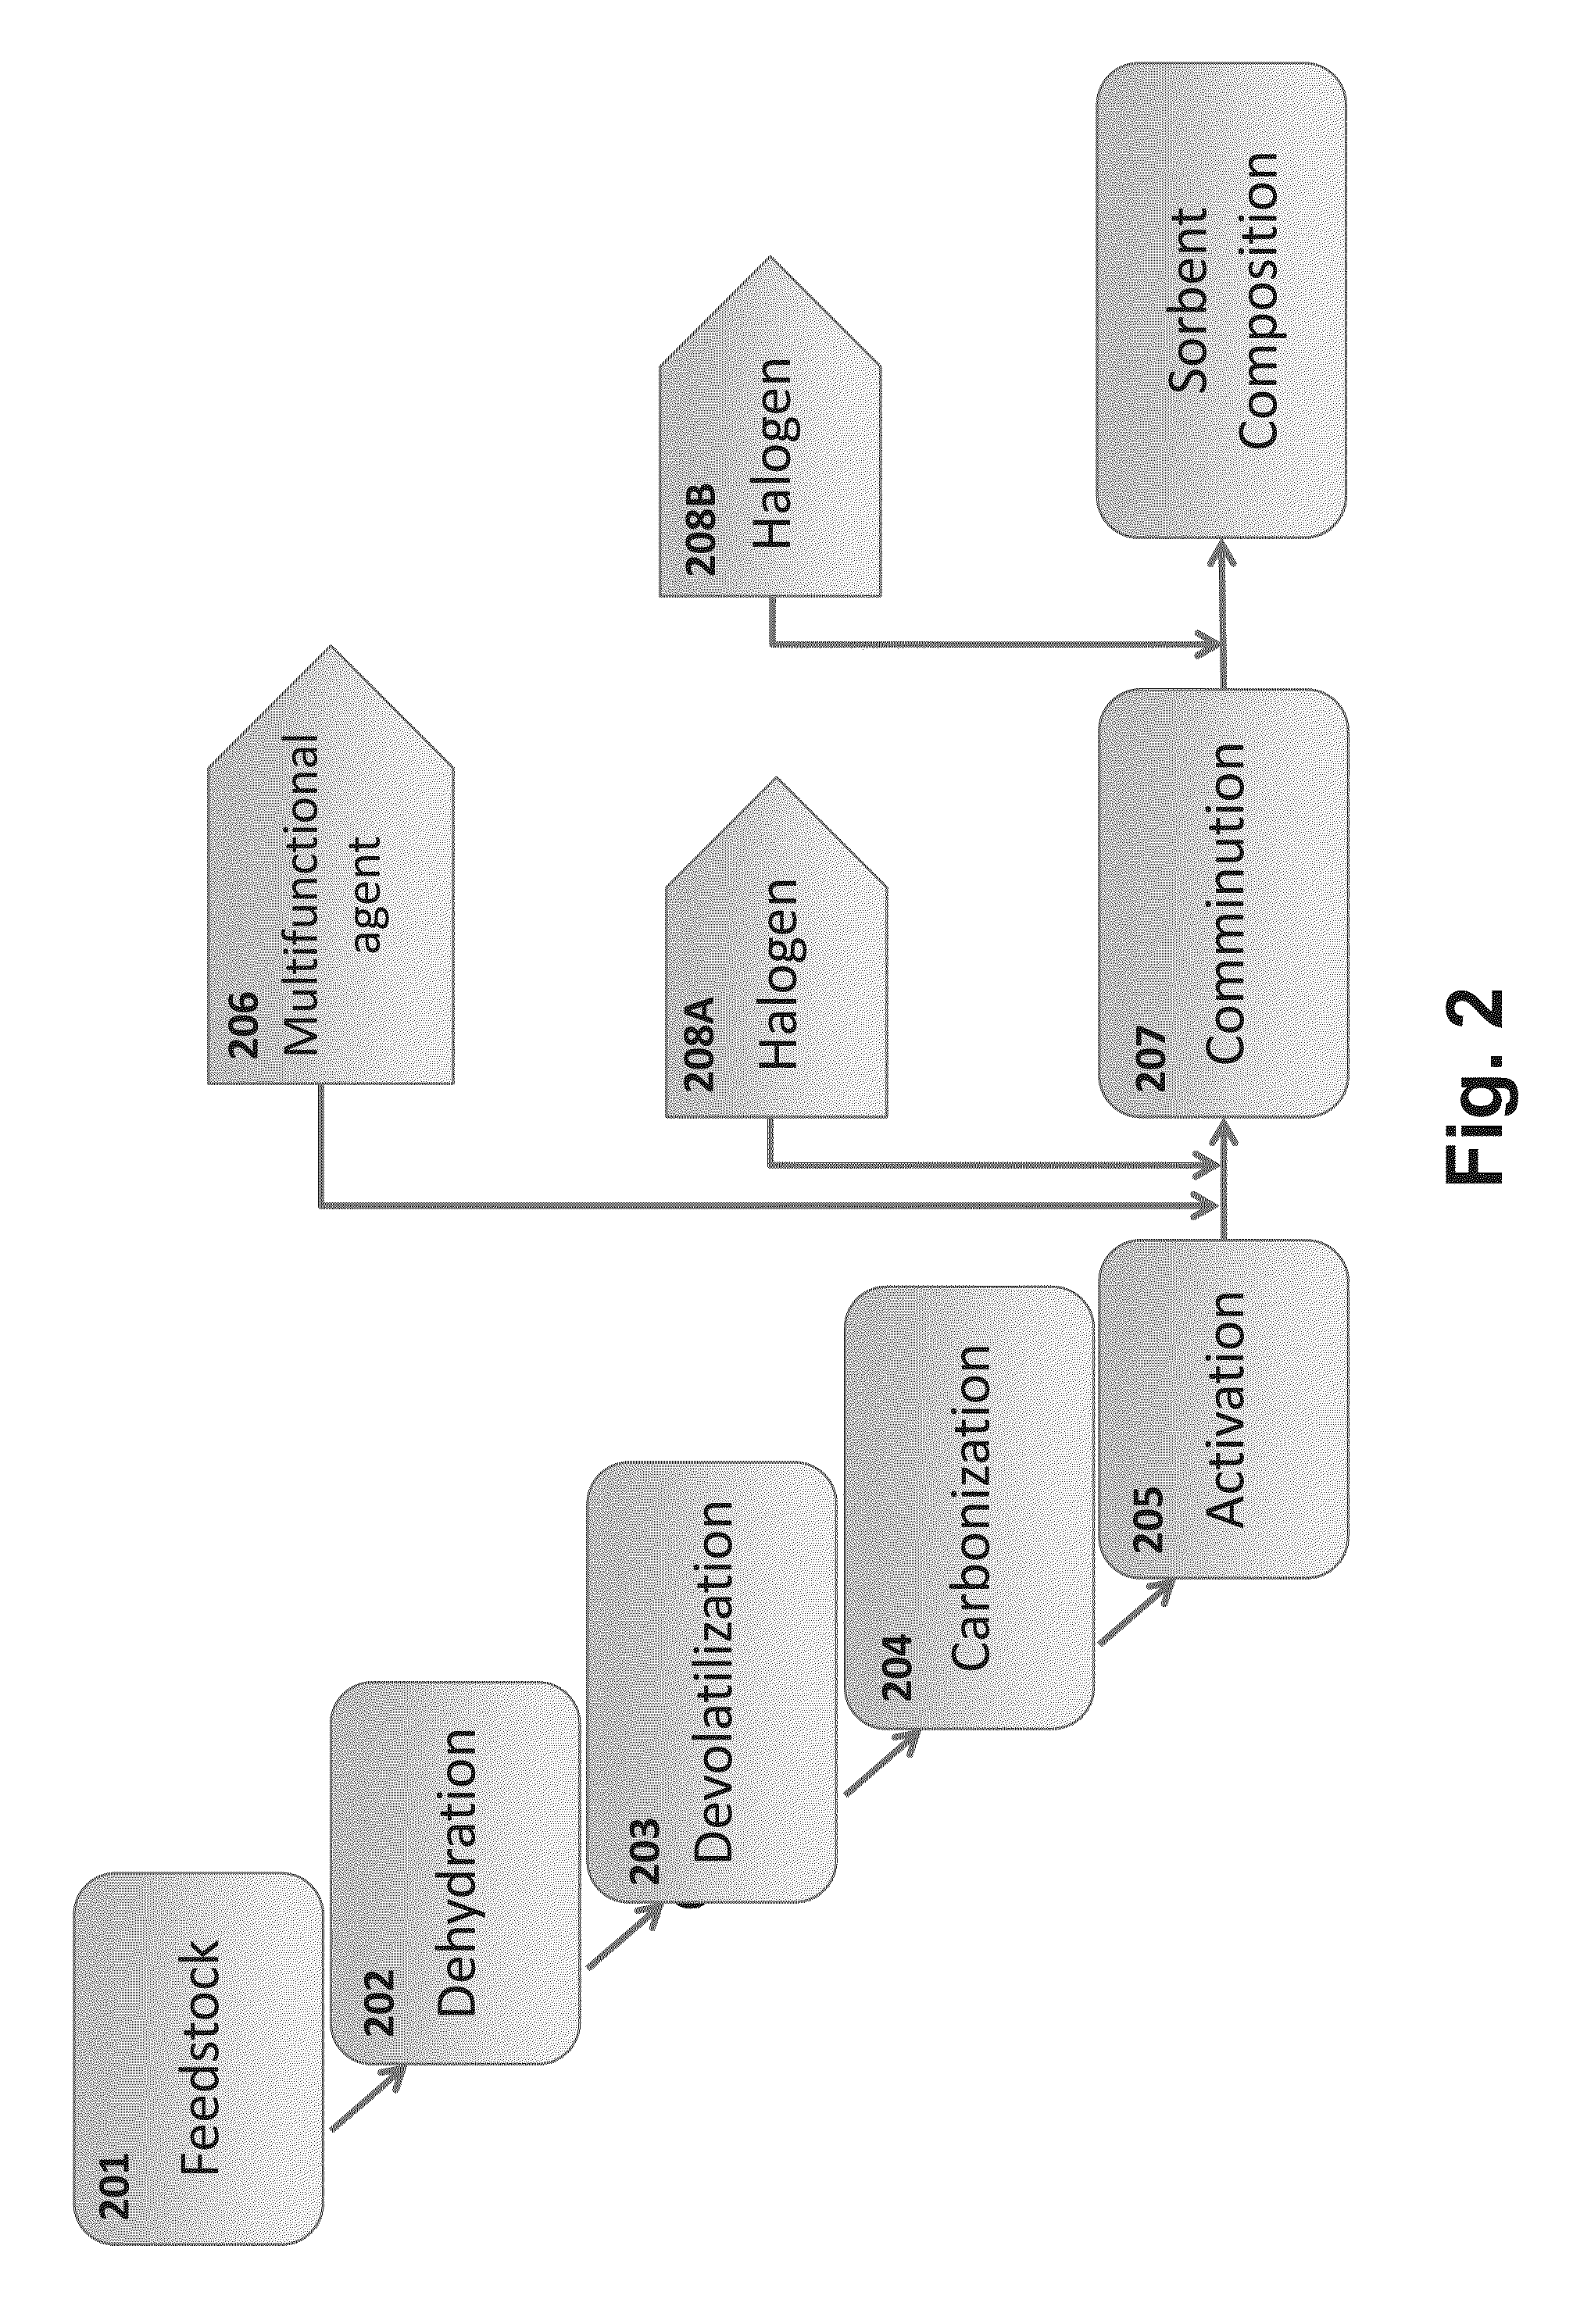 Composition for acid gas tolerant removal of mercury from a flue gas